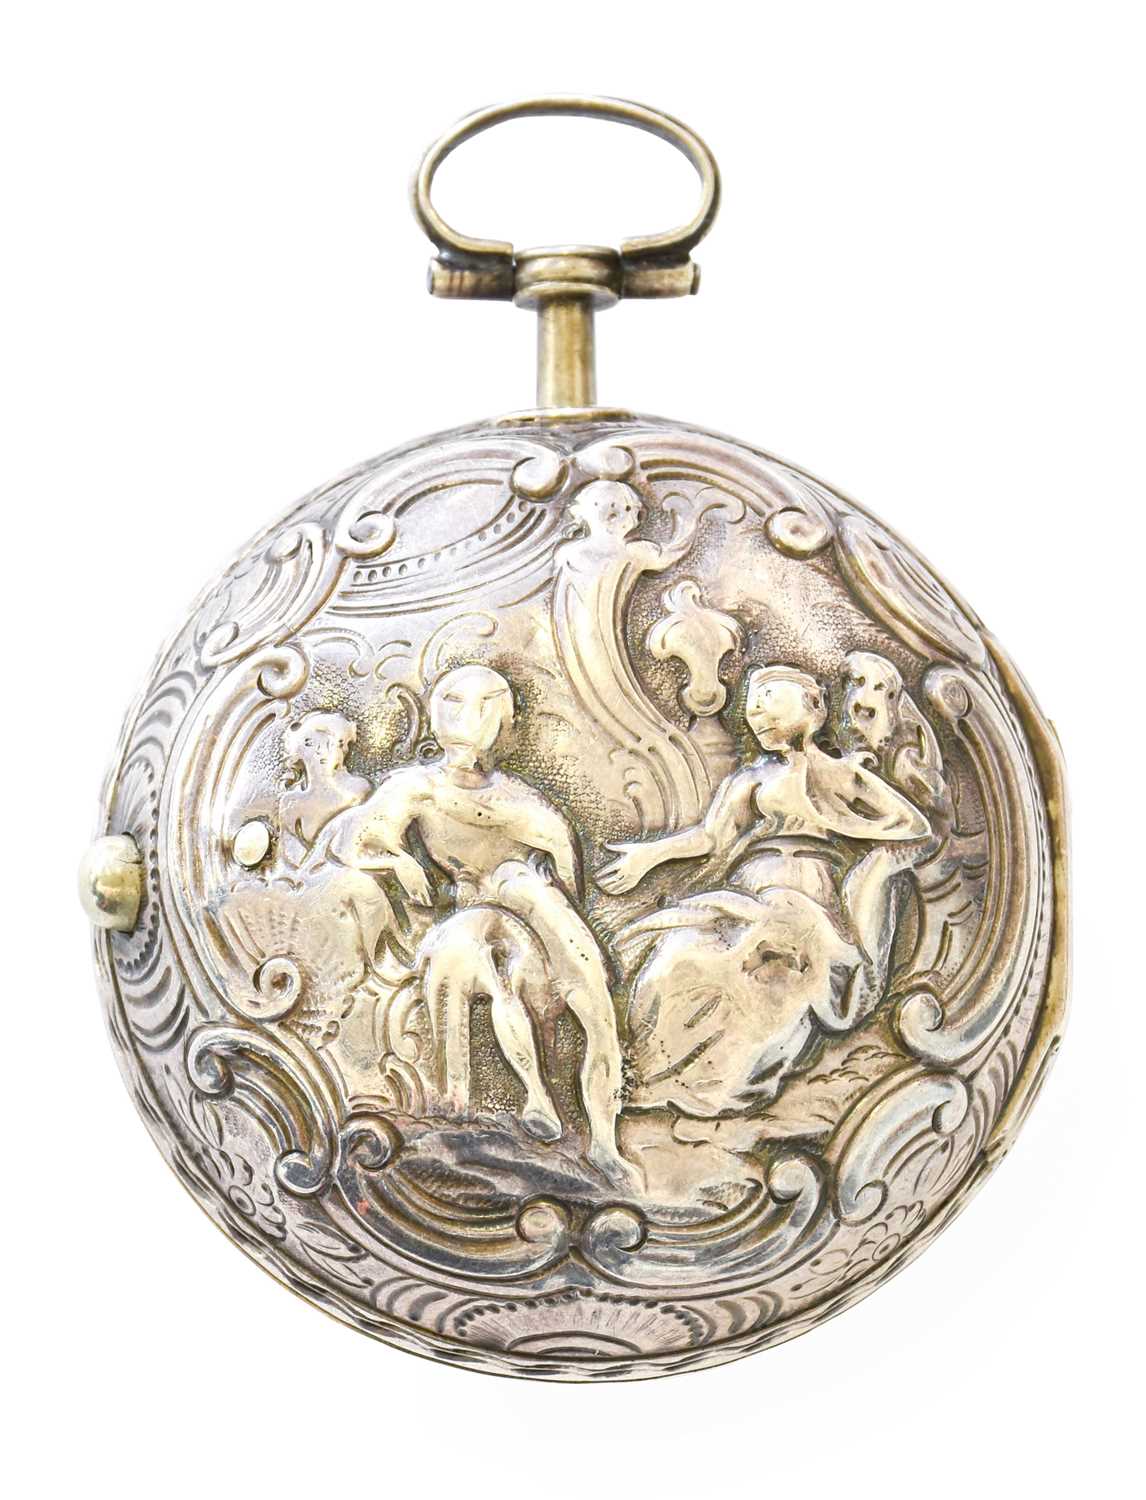 A Silver Pair Cased Repousse Verge Pocket Watch, signed Samson, London, 1781, single chain fusee - Image 4 of 5